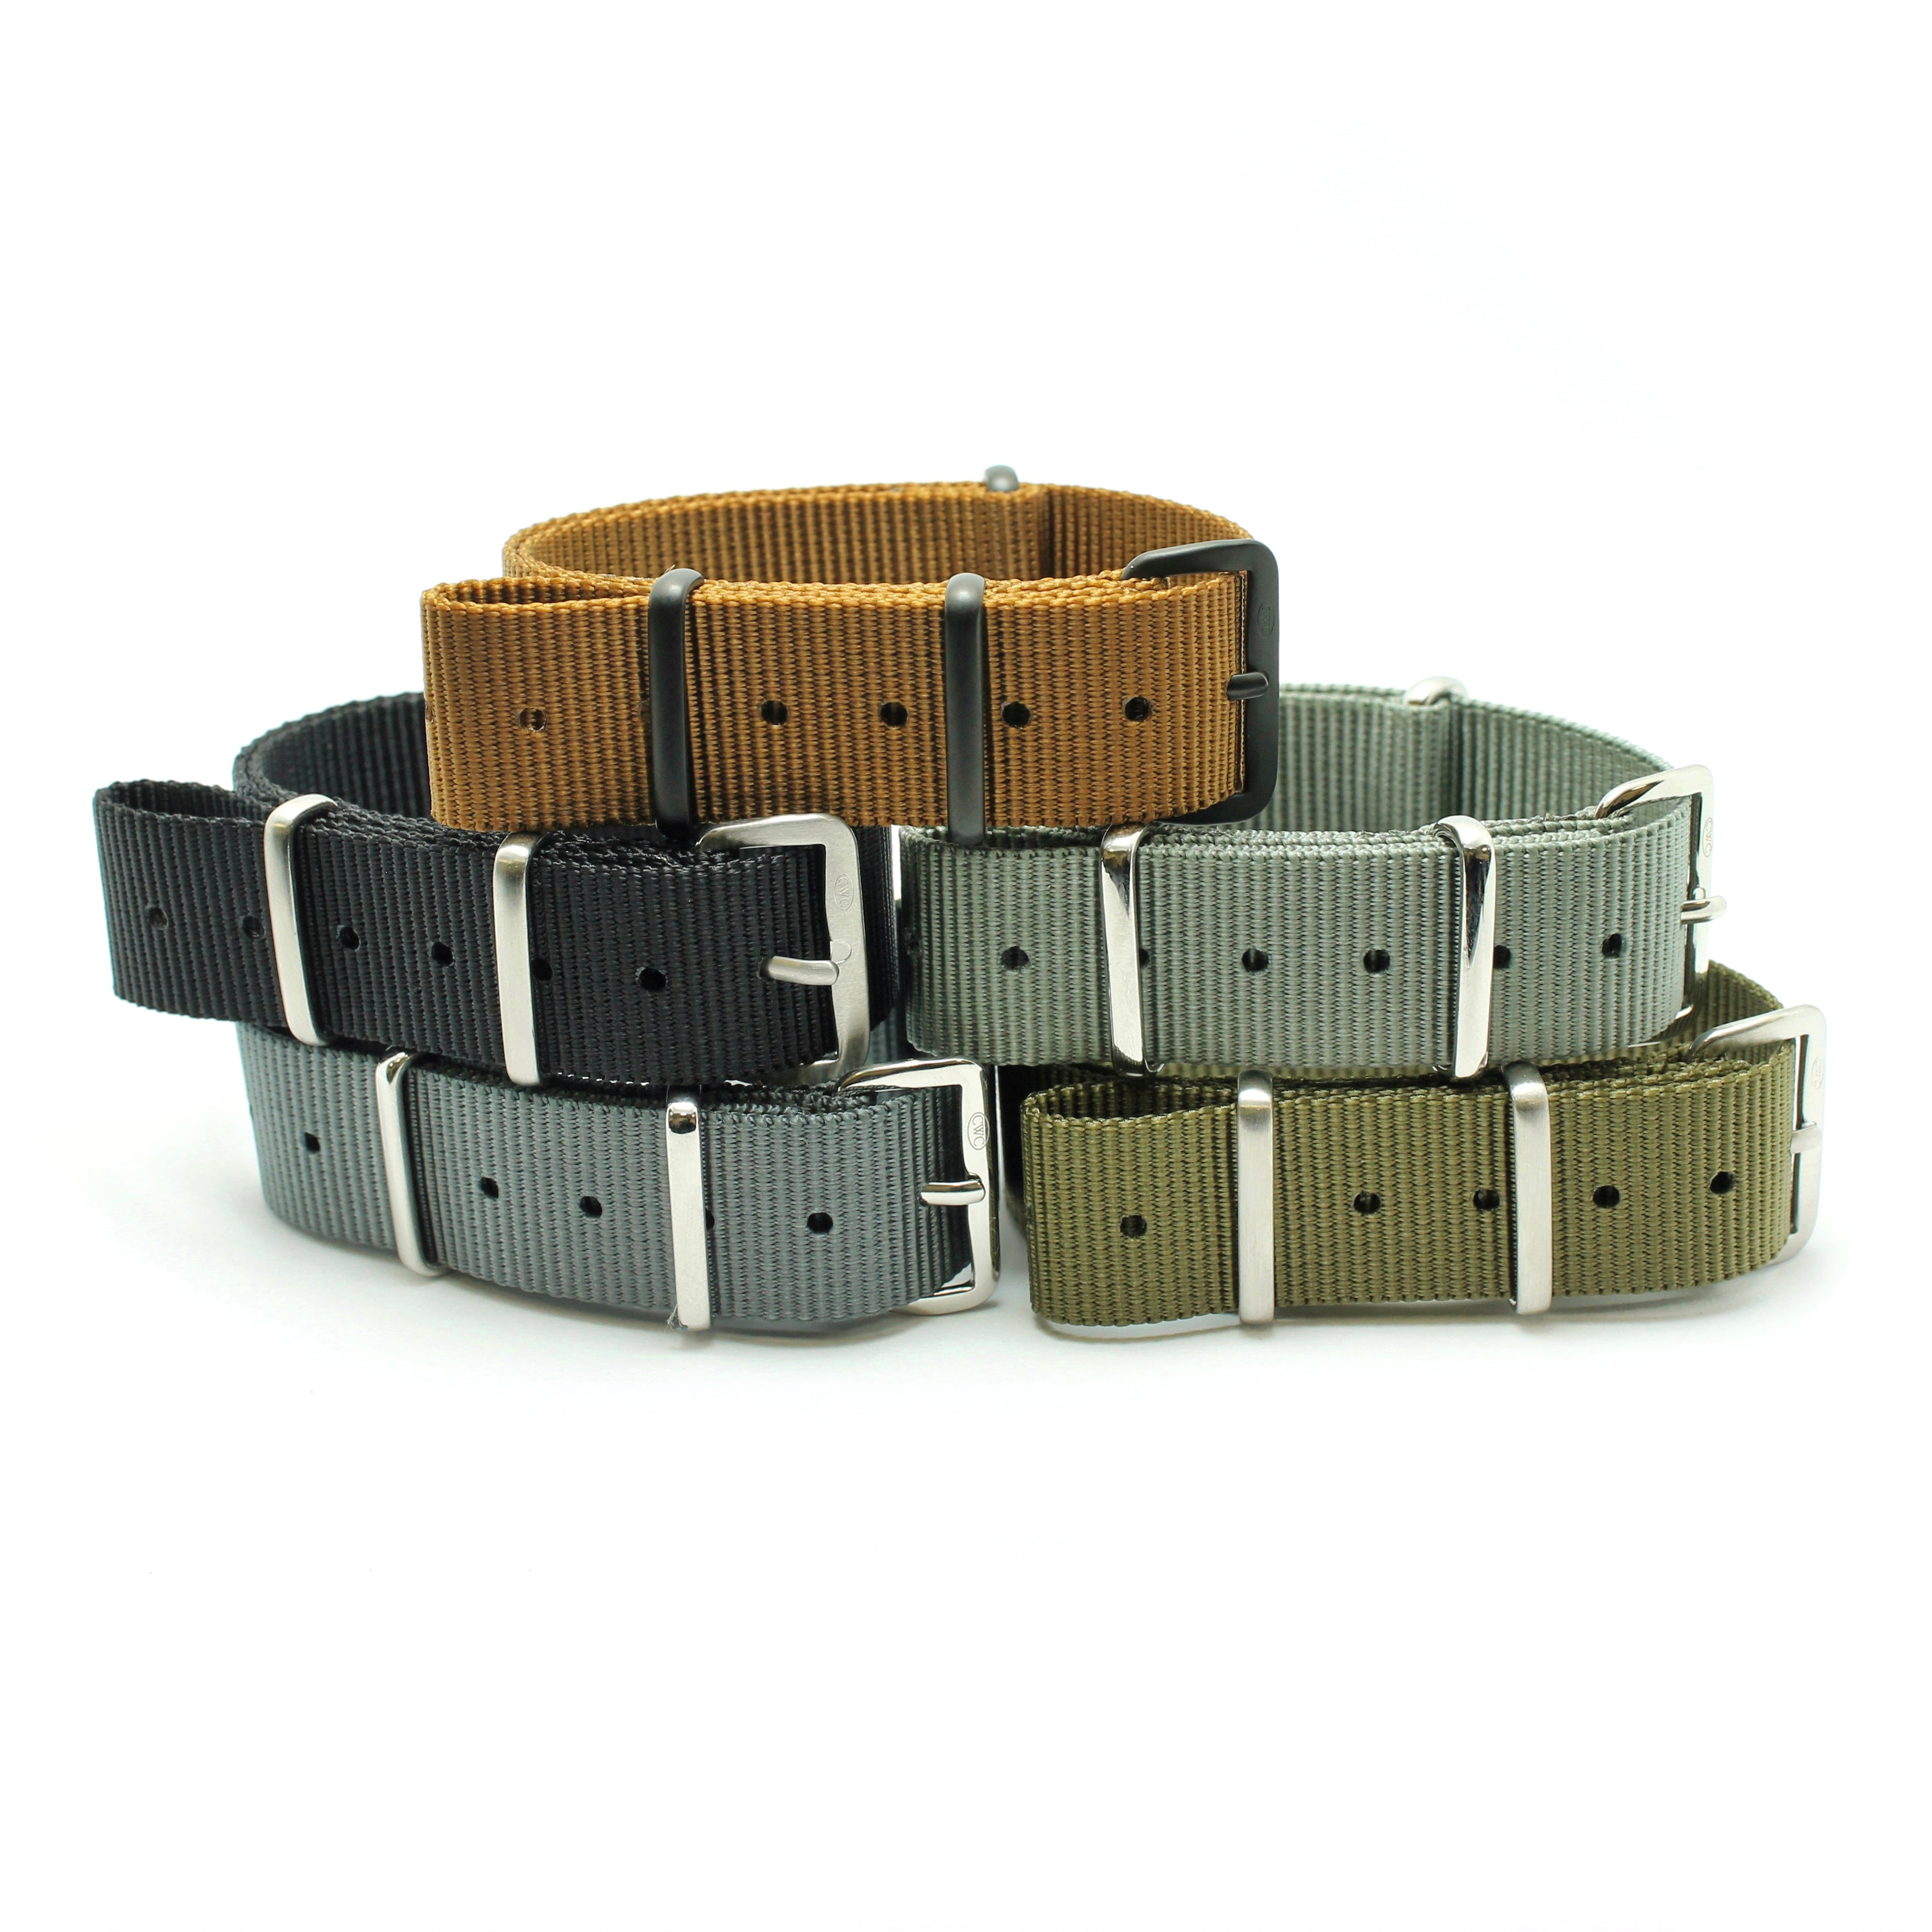 CABOT MILITARY WATCH STRAPS - various colours piled up